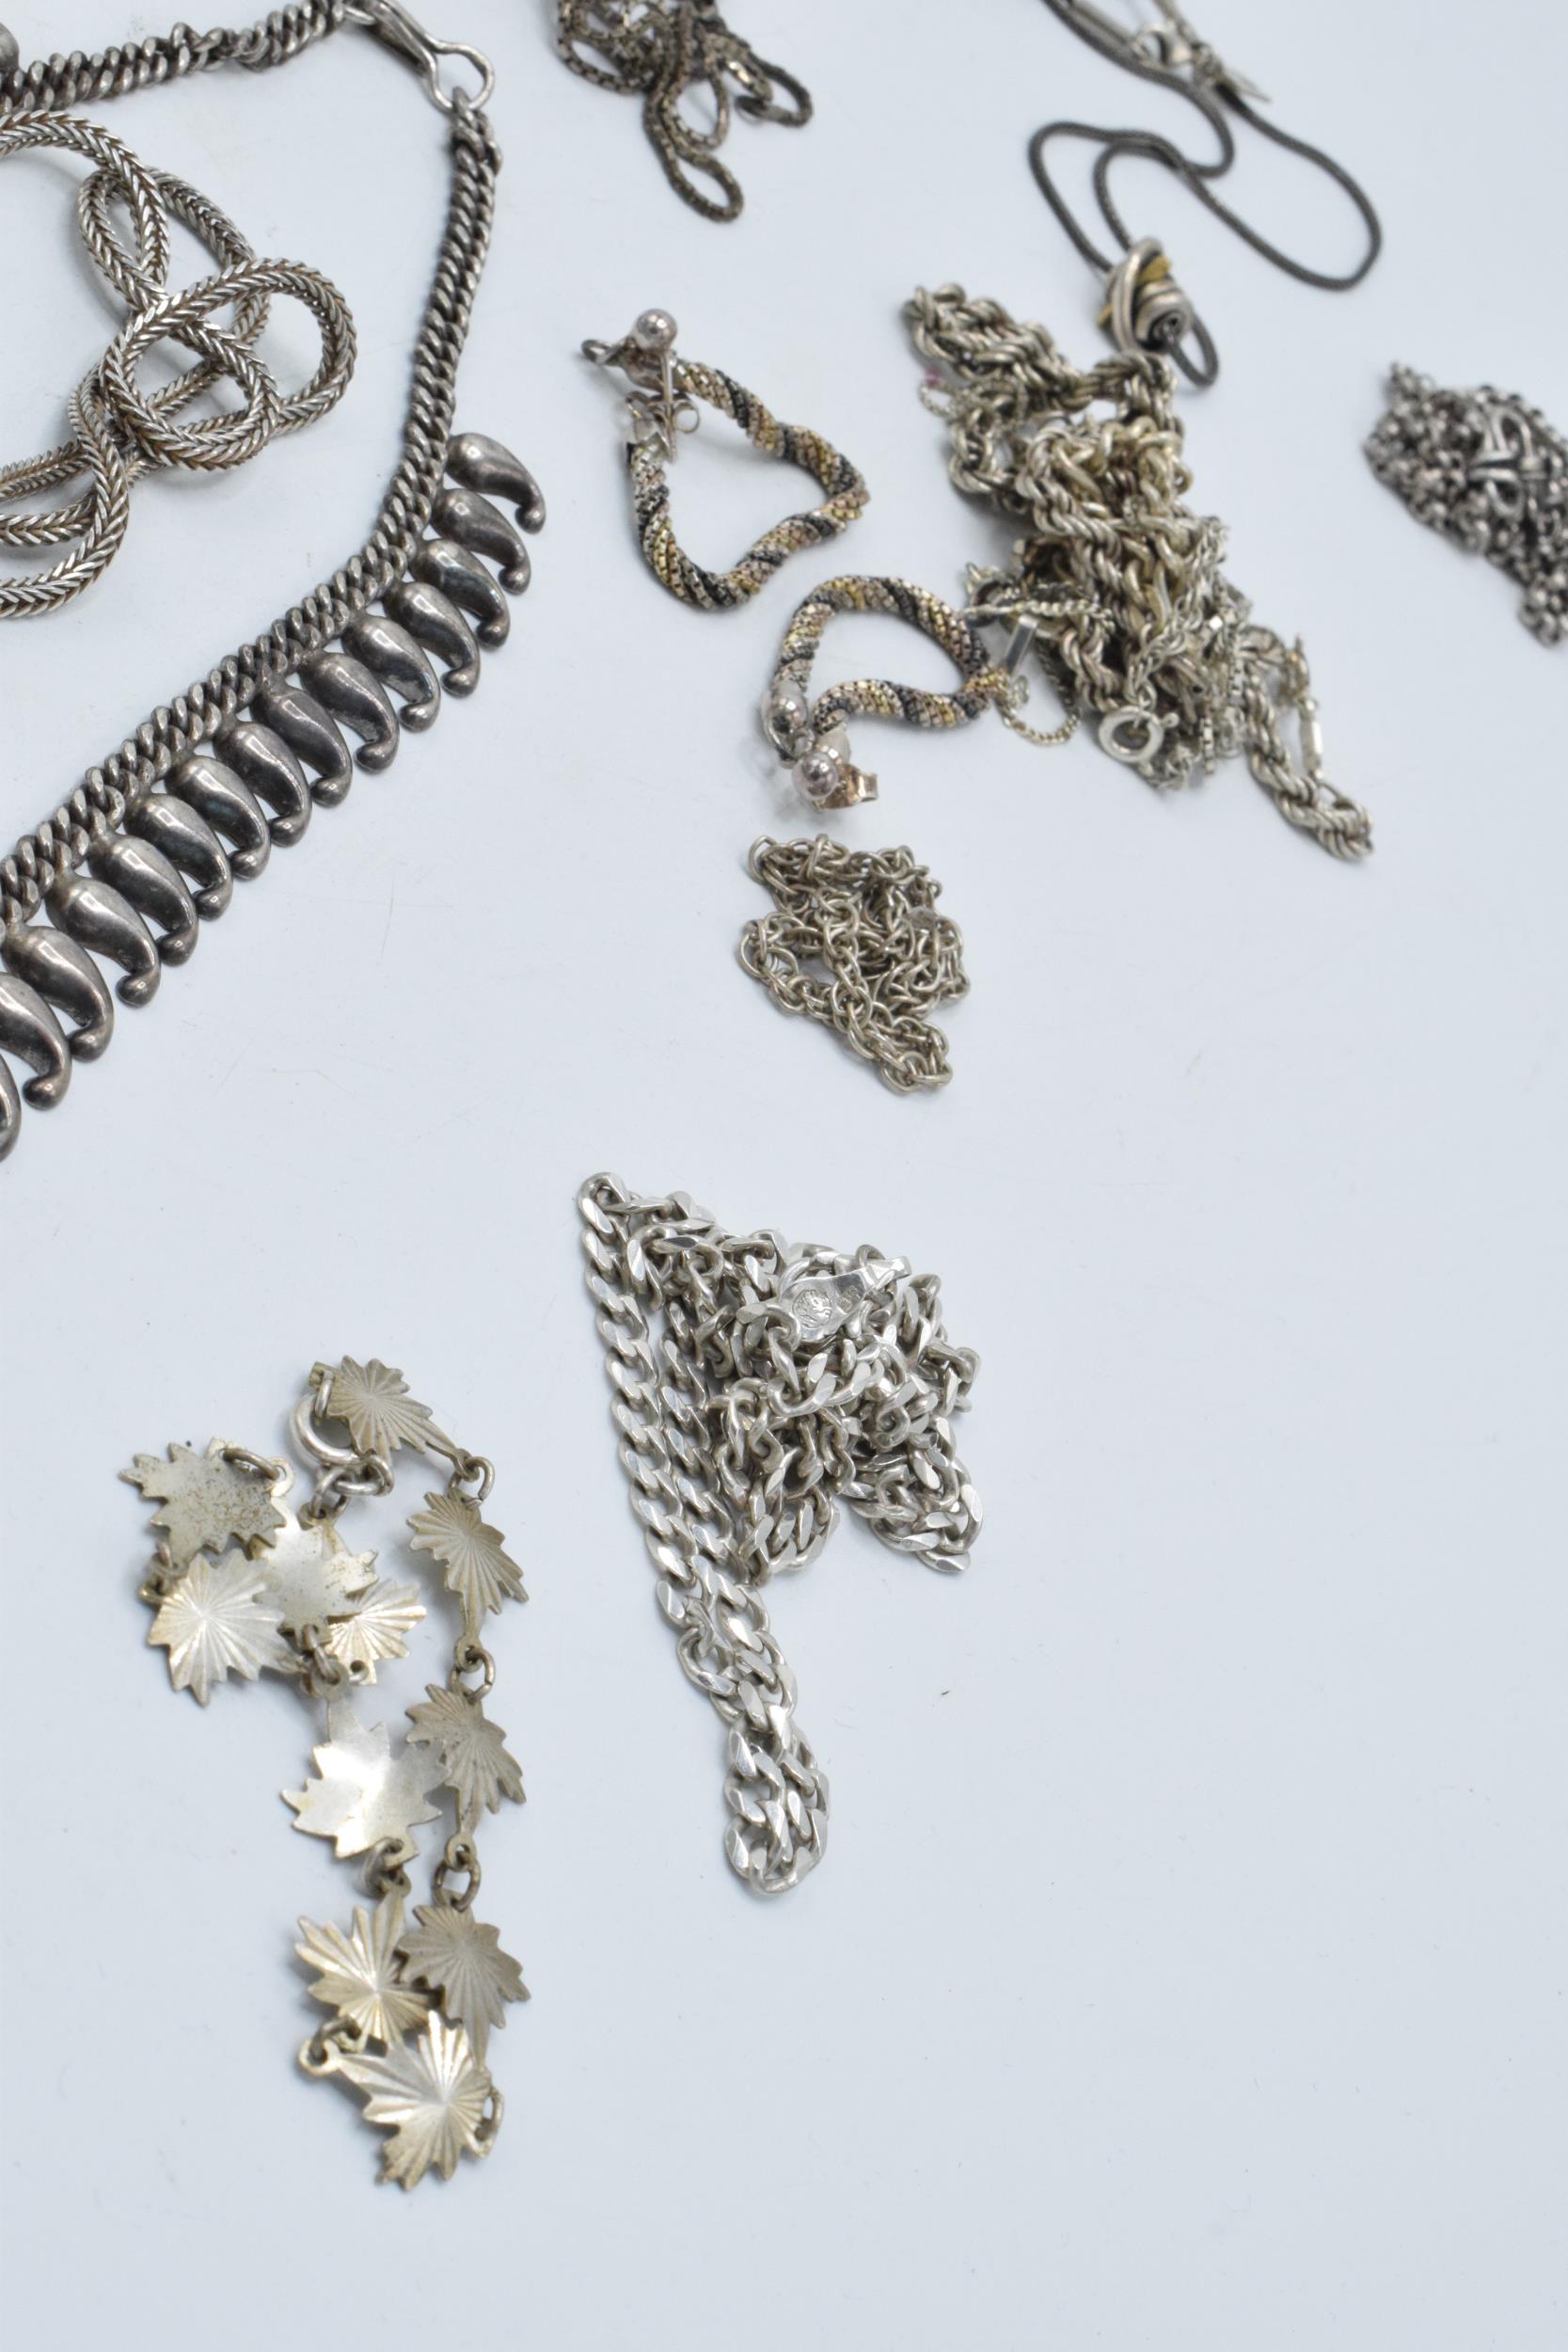 A collection of silver chains and necklaces of varying lengths and styles, 190.8 grams. - Image 4 of 6